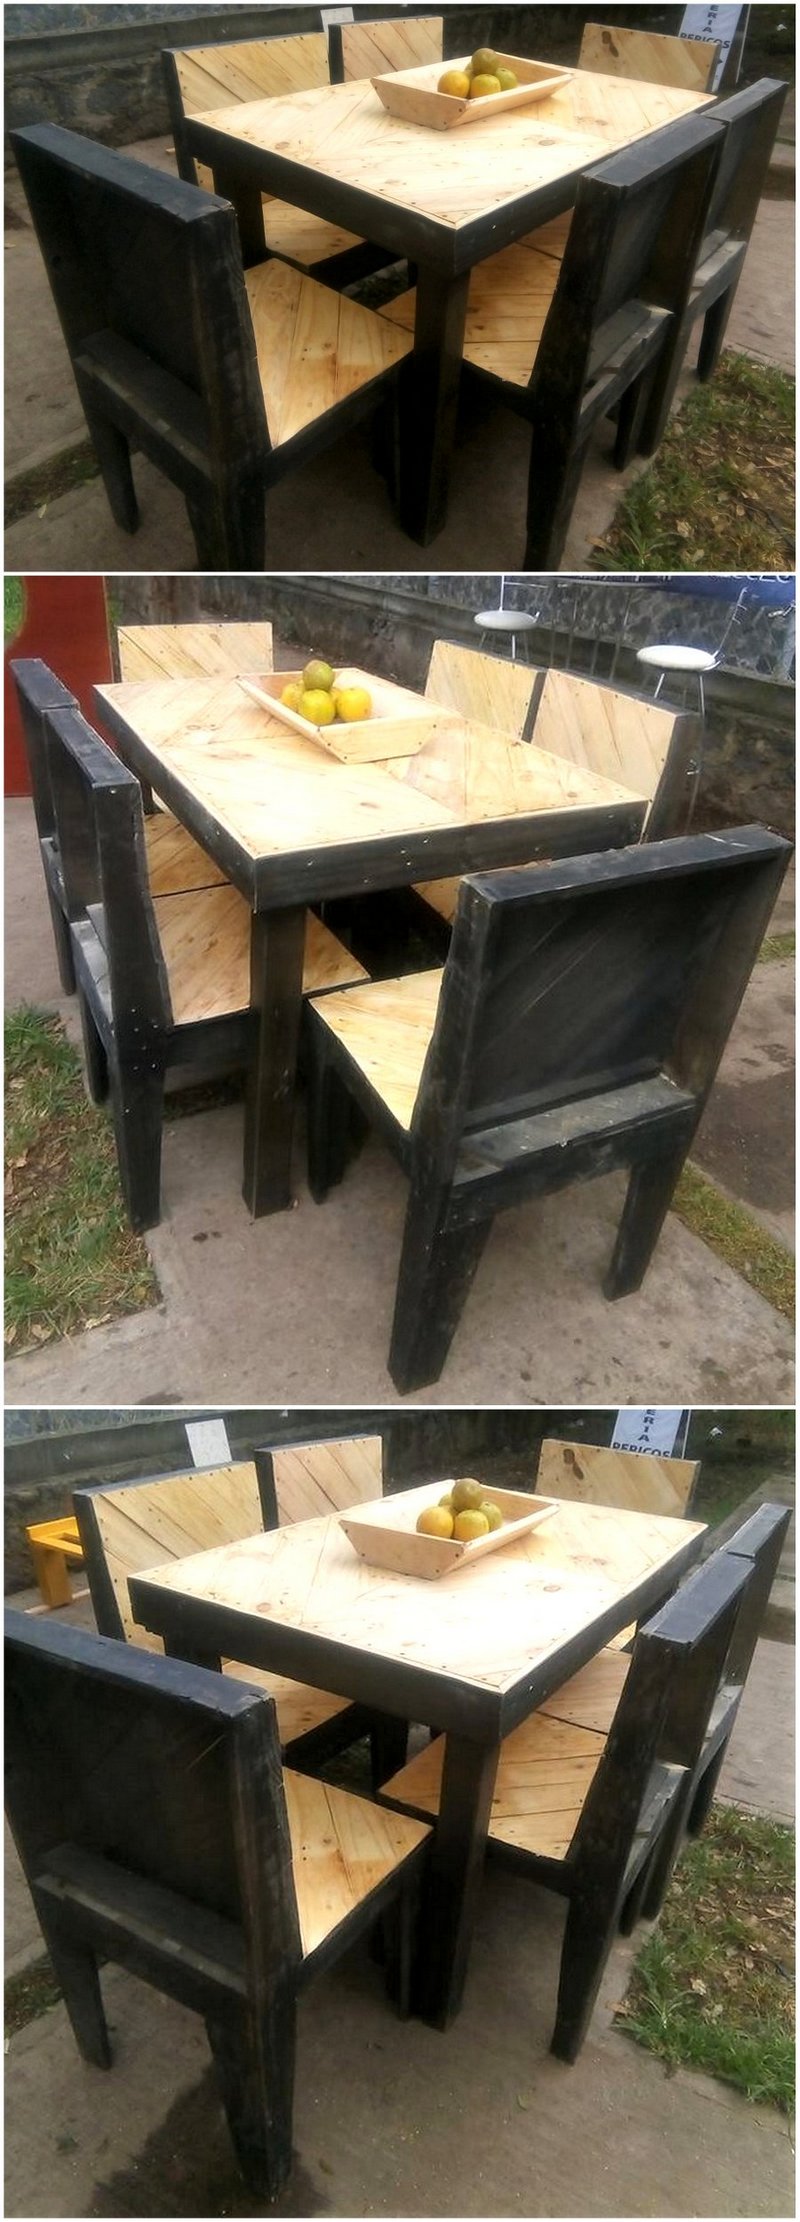 recycled pallet dining set